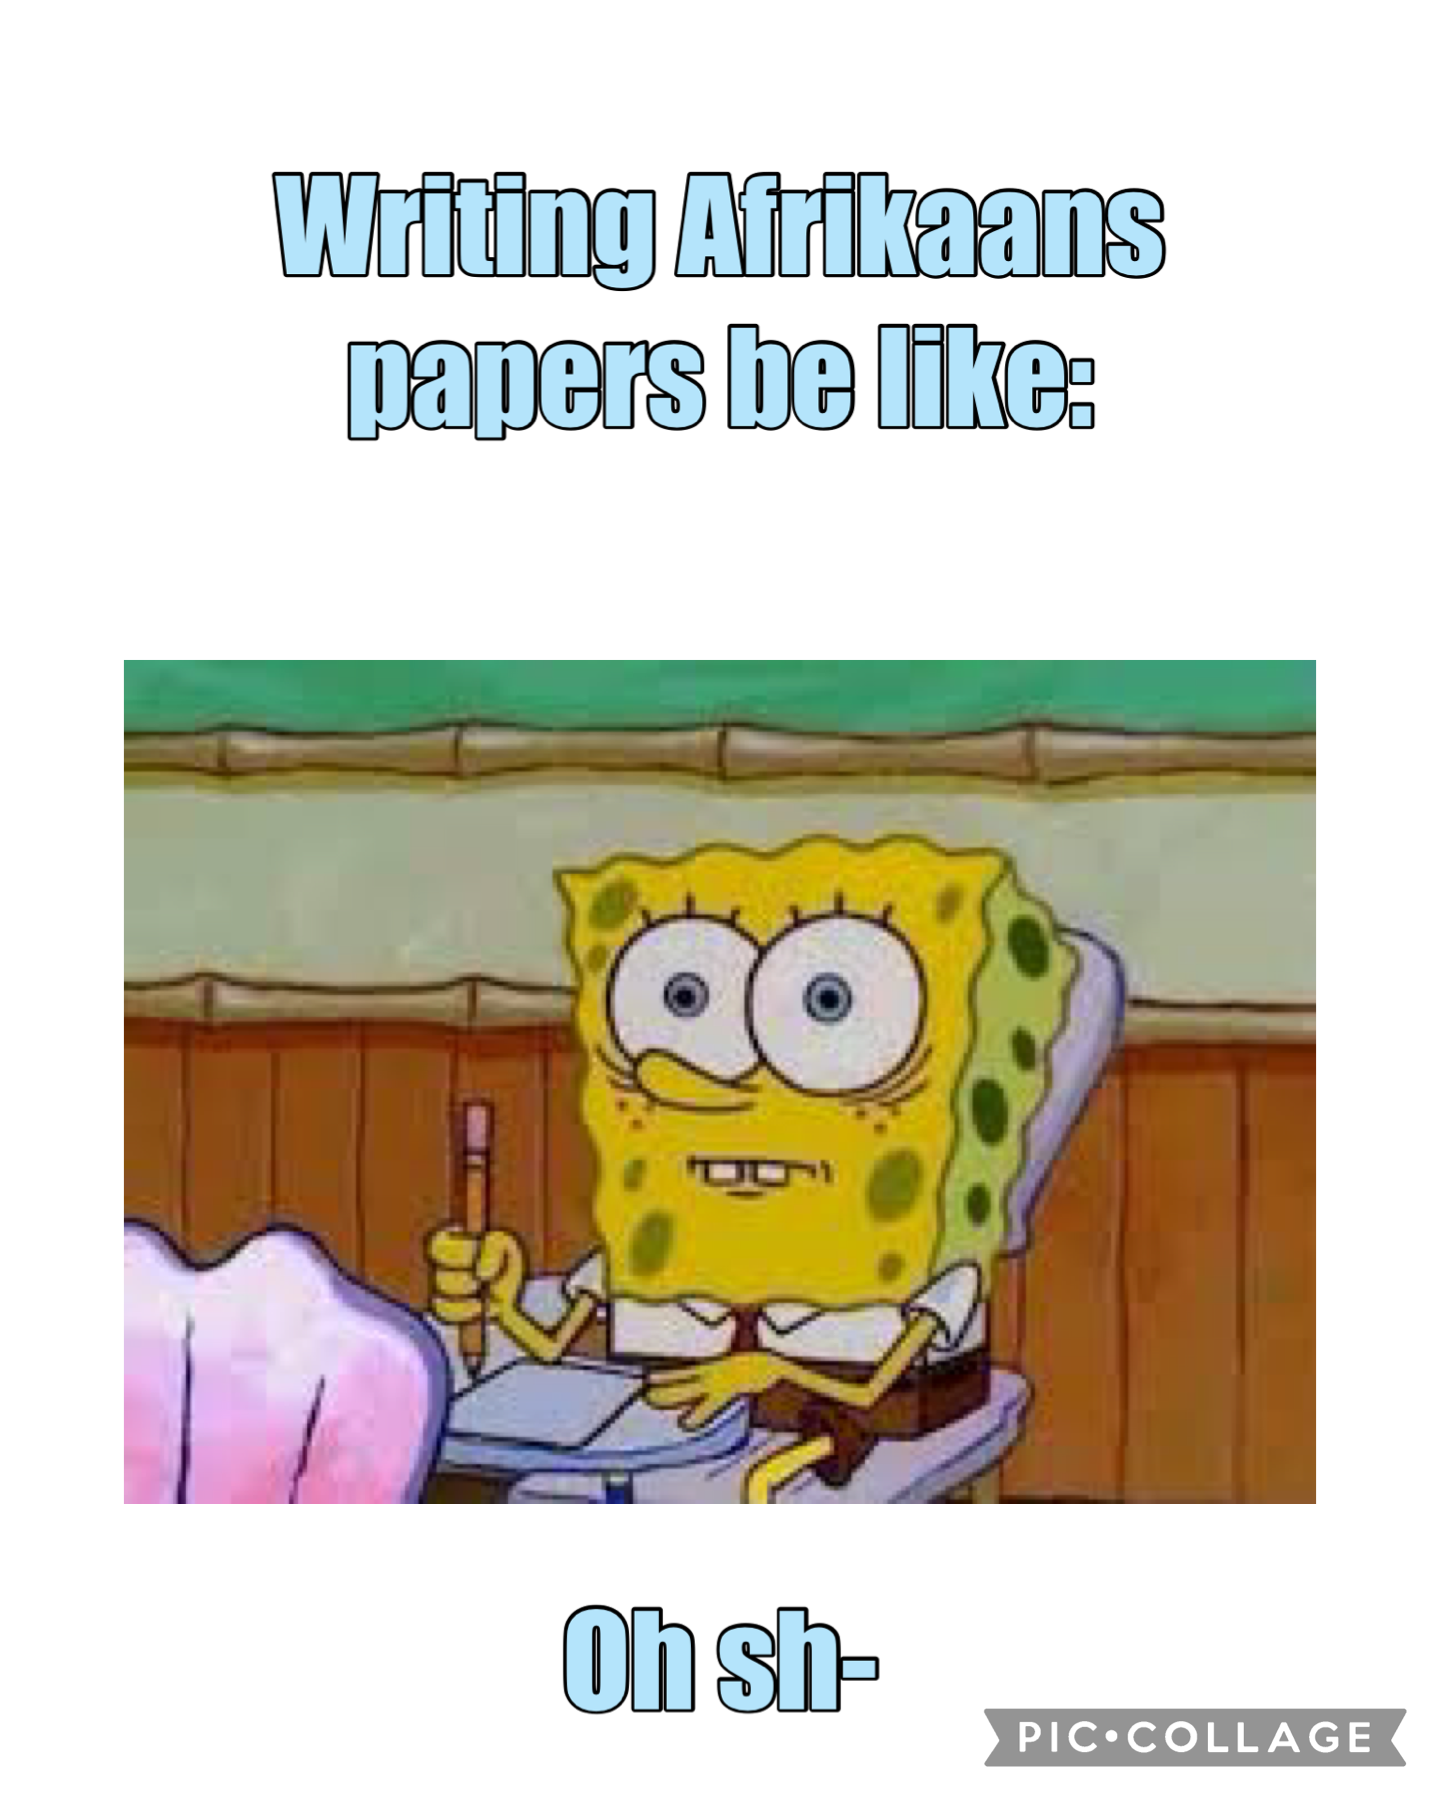 Afrikaans papers be like: